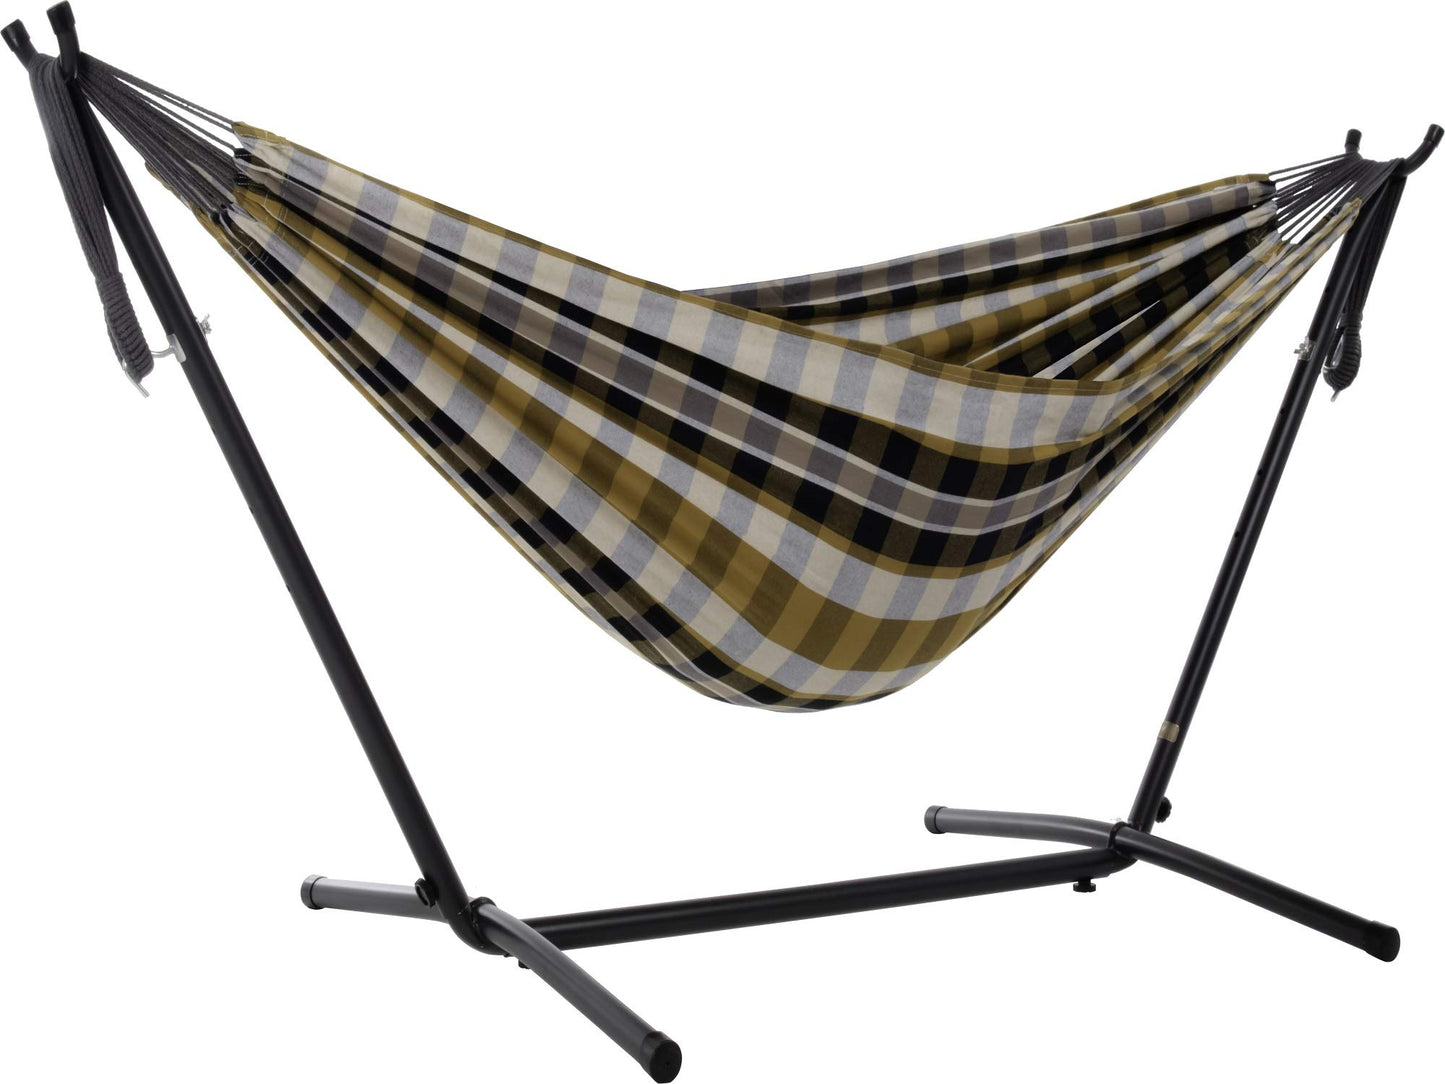 110" Gray & Gold Plaid Brazilian Hammock with Steel Stand - The Hamptons Collection